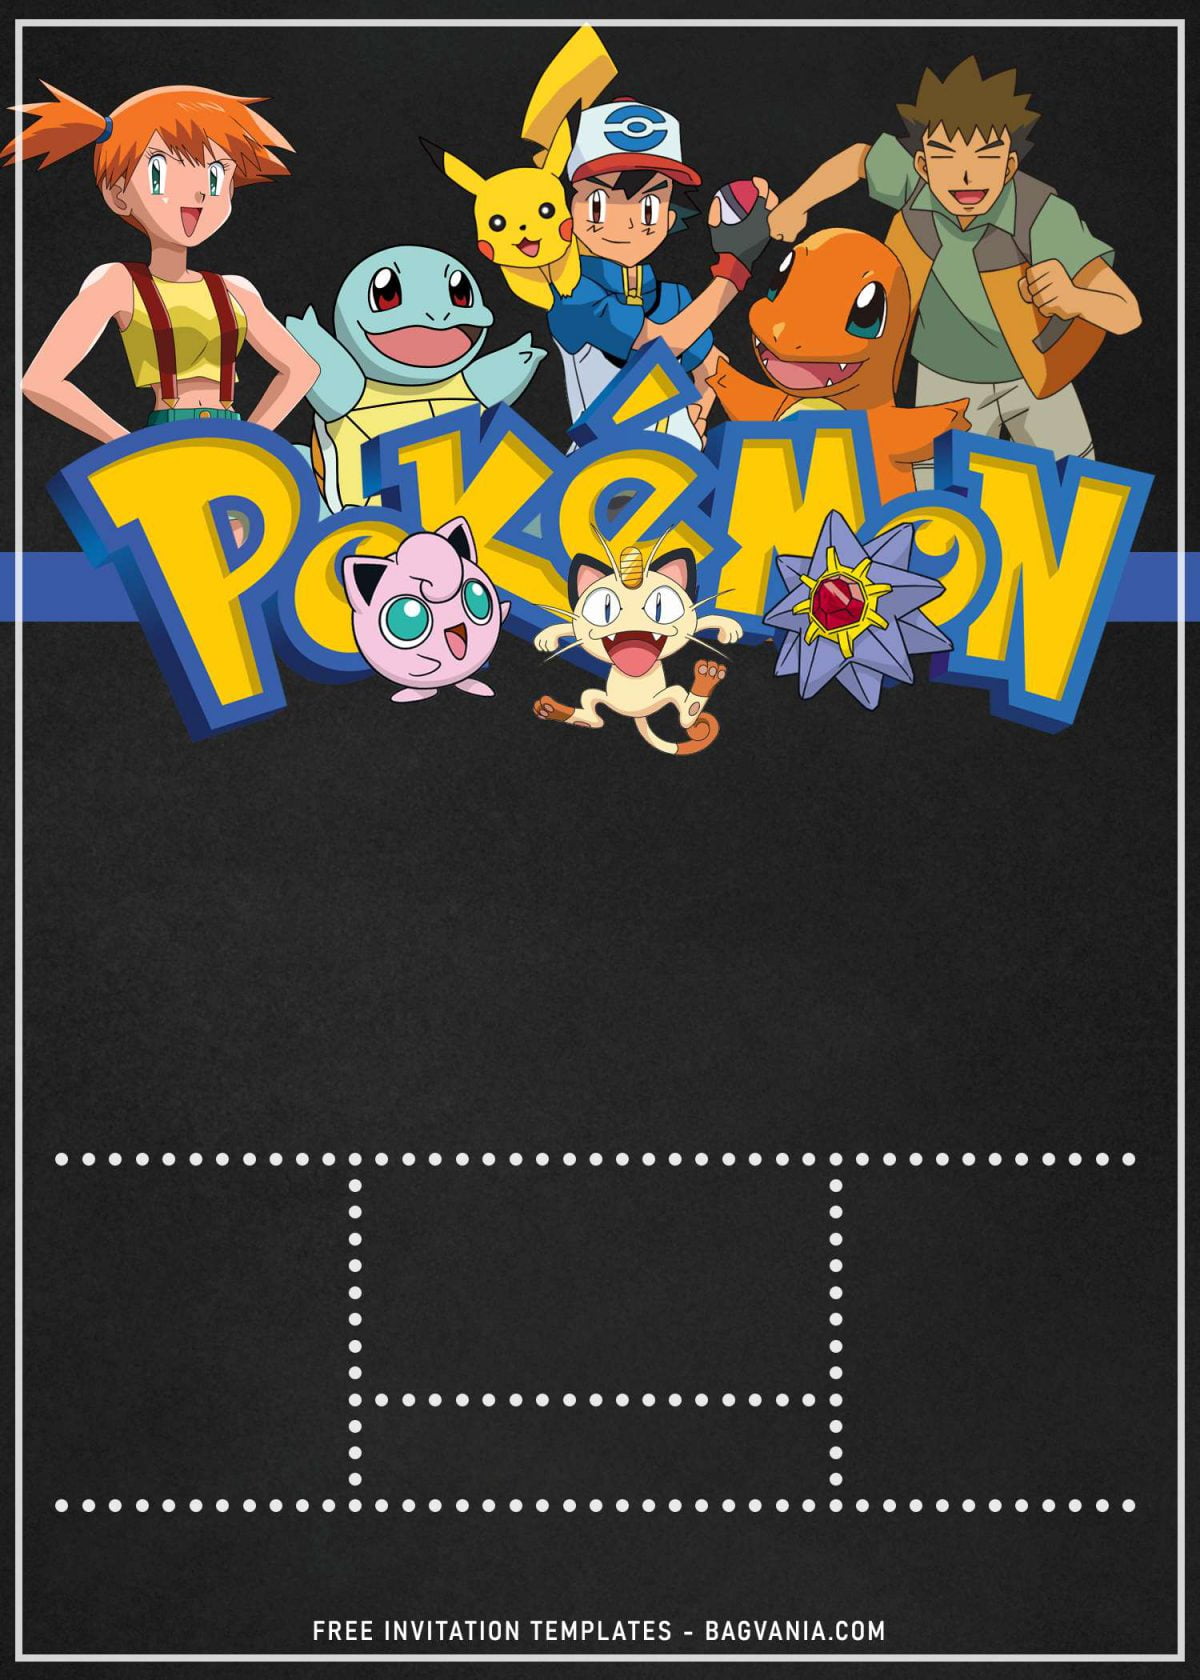 11+ Awesome Pokemon Chalkboard Invitation Templates For Boys Birthday Party and has Misty and Brock